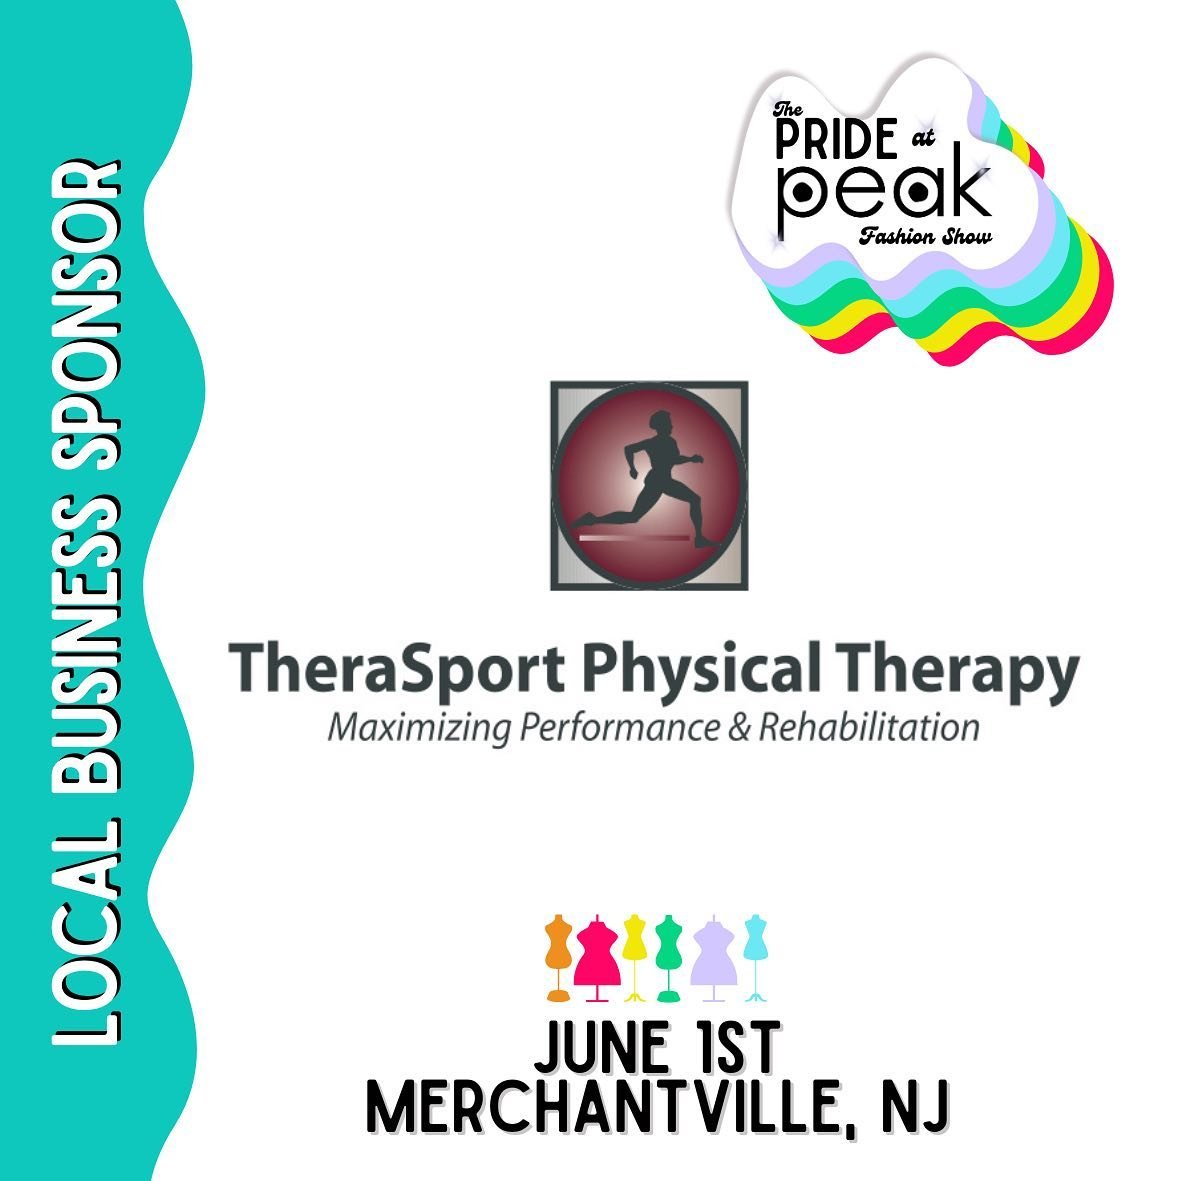 👋 Hello! Did you know @therasport_pt now has THREE* locations throughout NJ? Did you also know they are another Pride at Peak Fashion Show Local Business Sponsor?! Thank you TheraSport Physical Therapy for another year of supporting &amp; showing up